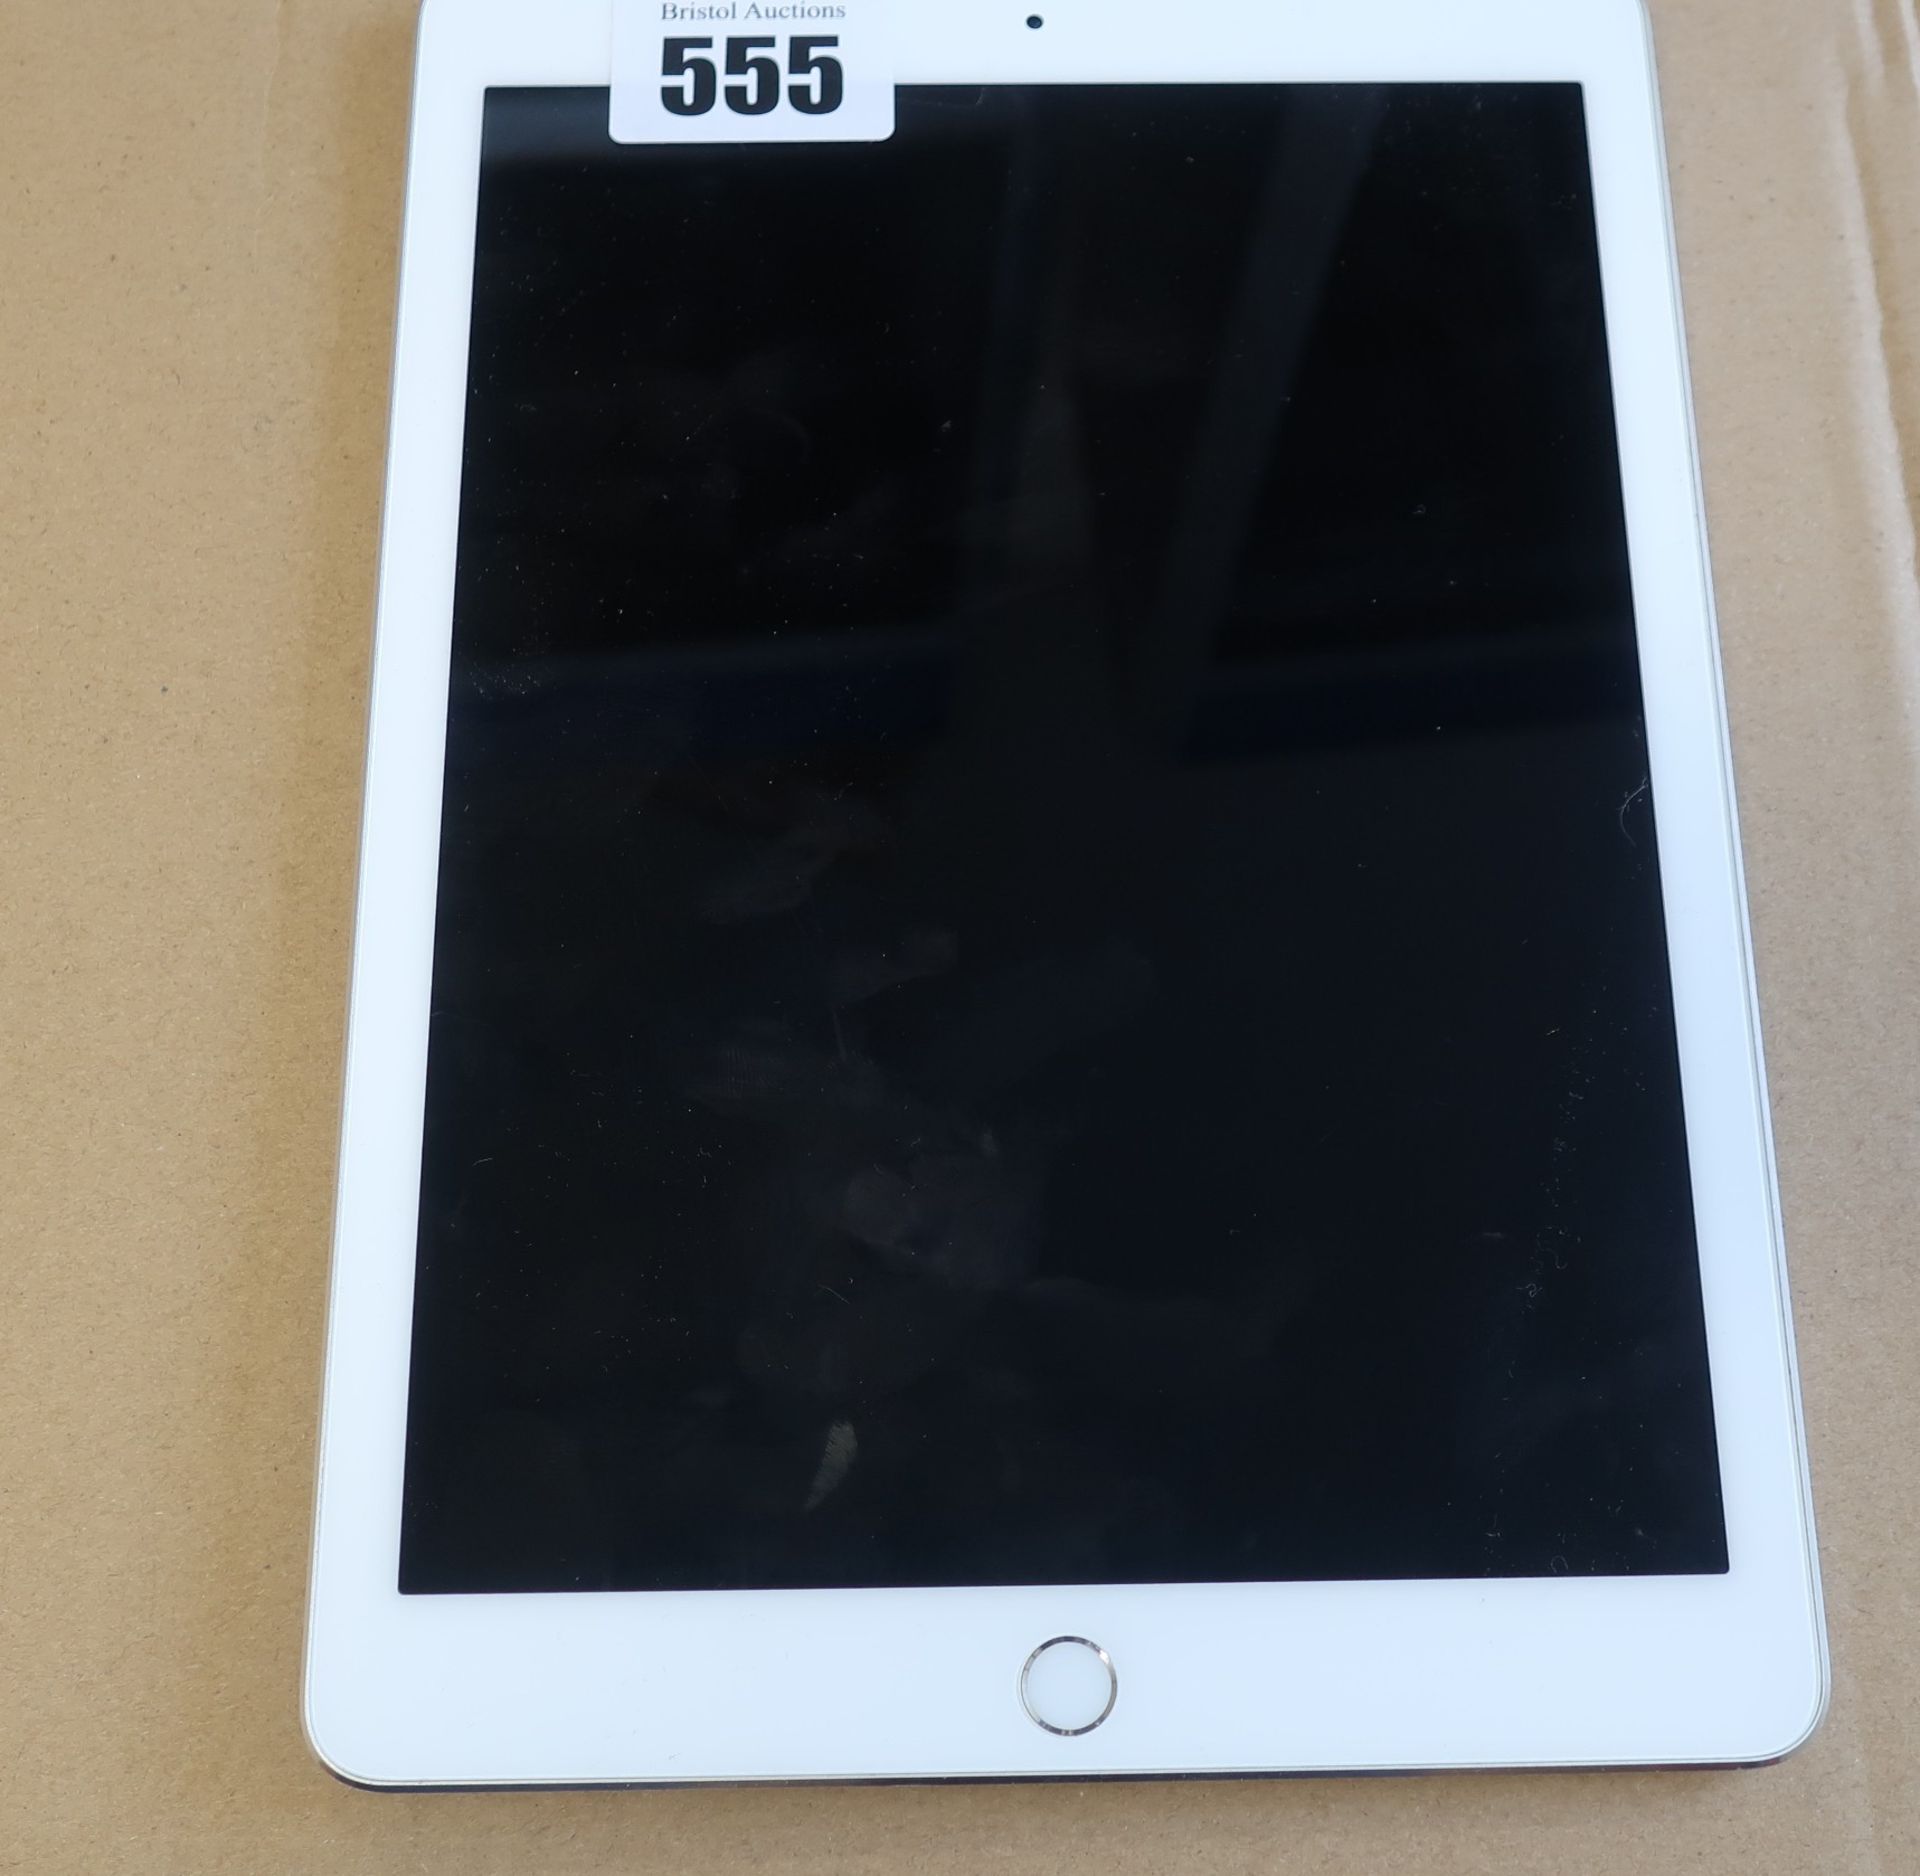 A pre-owned Apple iPad Pro 9.7" (Wi-Fi/Cellular) A1674 128GB in Silver (IMEI: 355448071118477) (